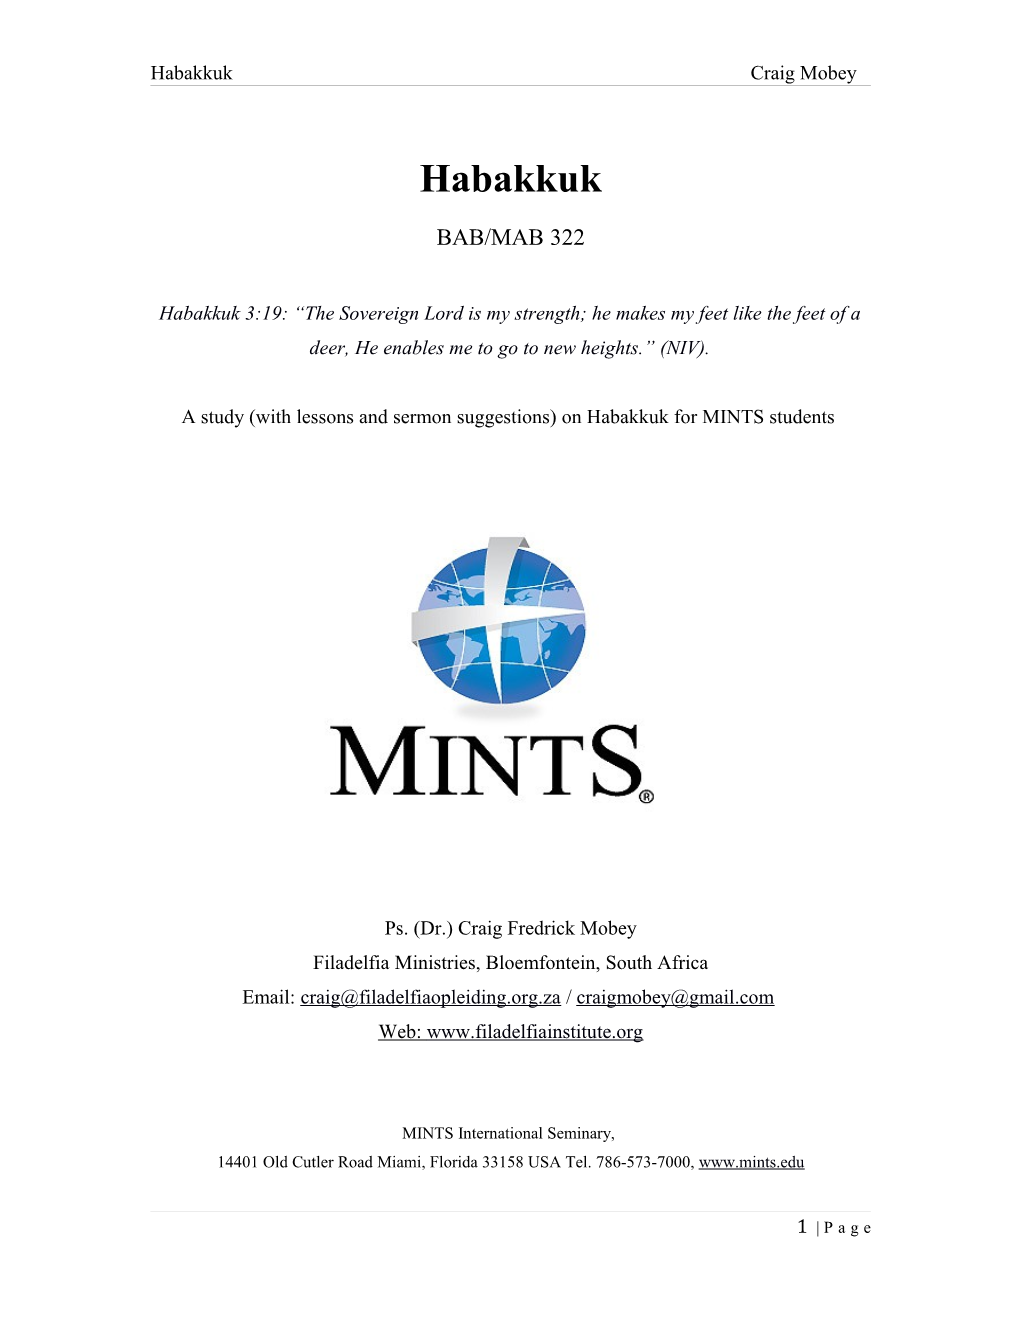 A Study (With Lessons and Sermon Suggestions) on Habakkuk for MINTS Students